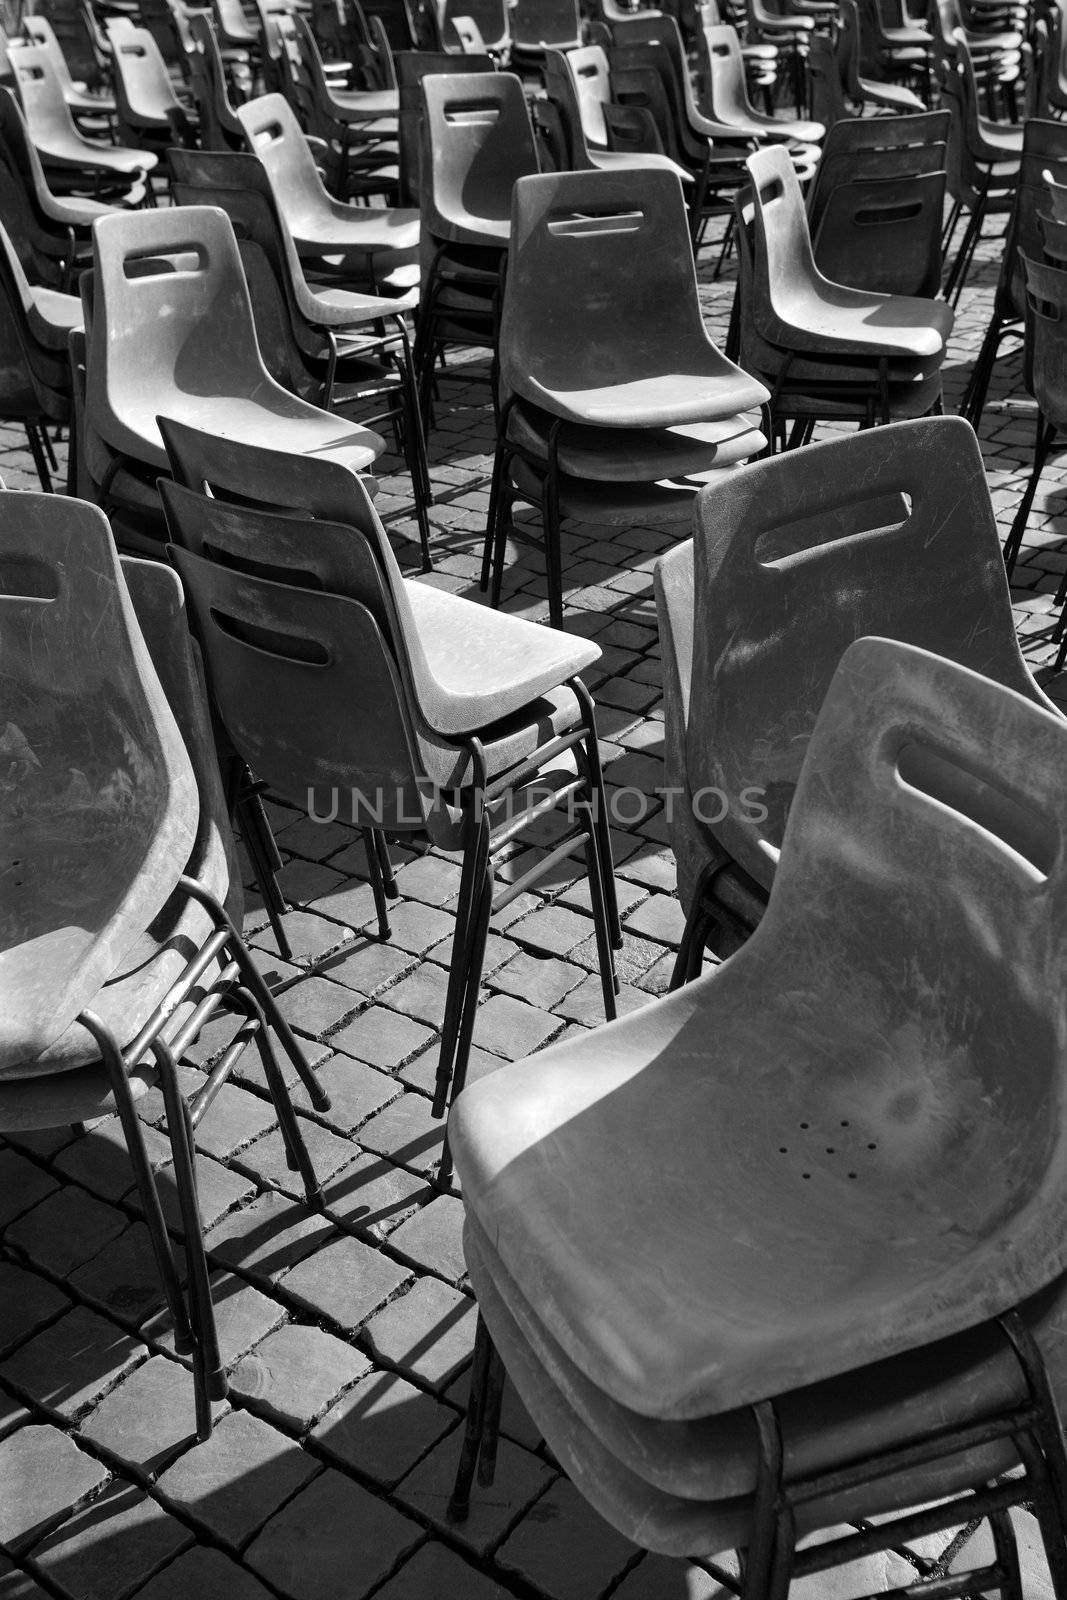 Stacked plastic chairs in Vatican city after the Pope made an appearance.
